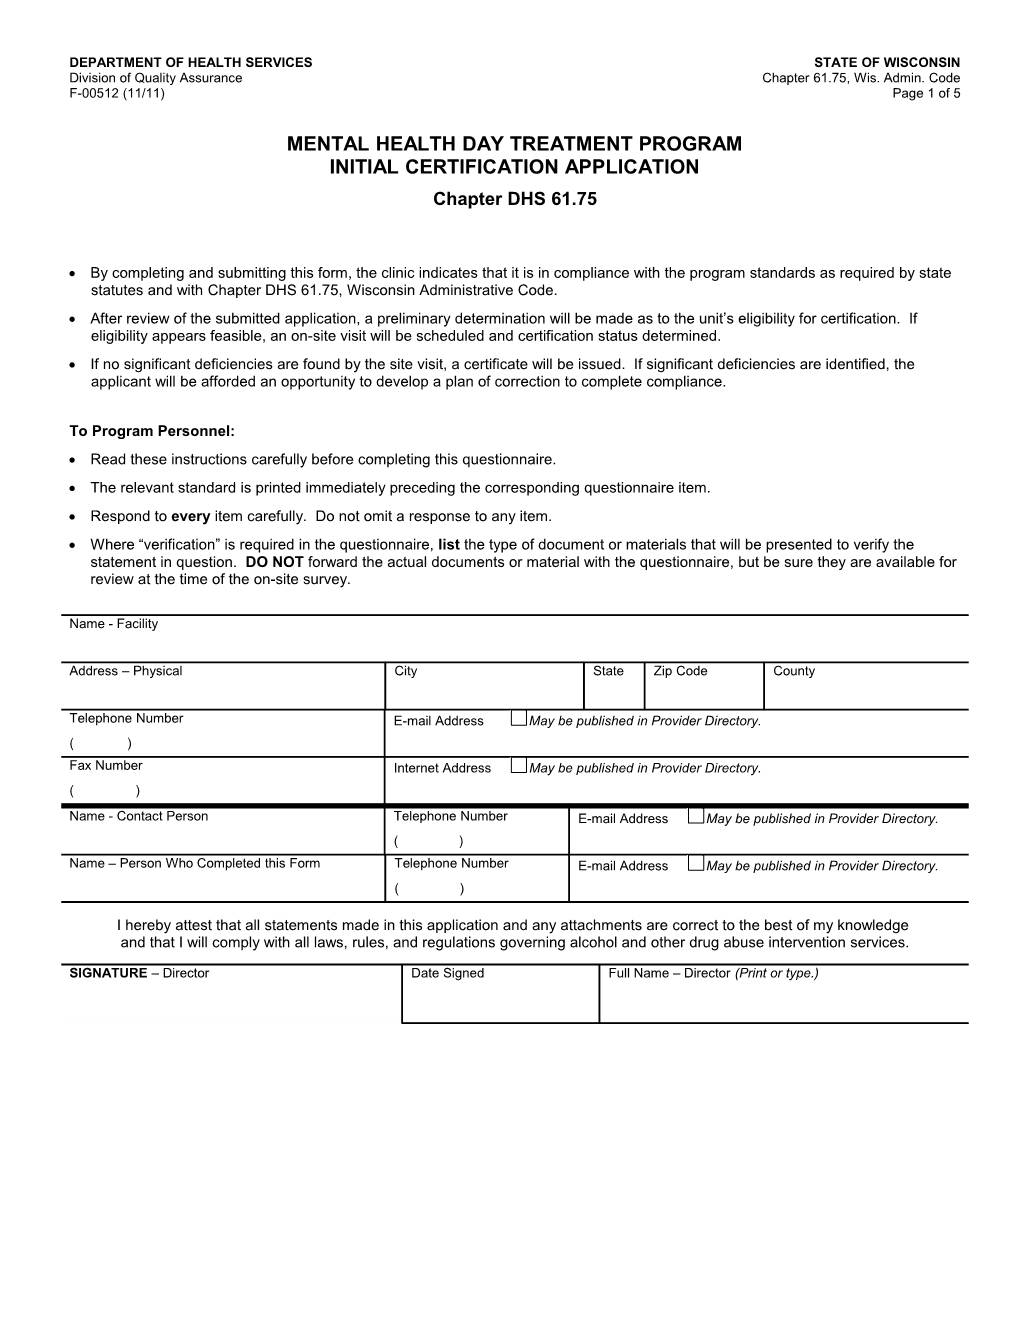 Mental Health Day Treatment Program Initial Certification Application - DHS 61.75, F-00512